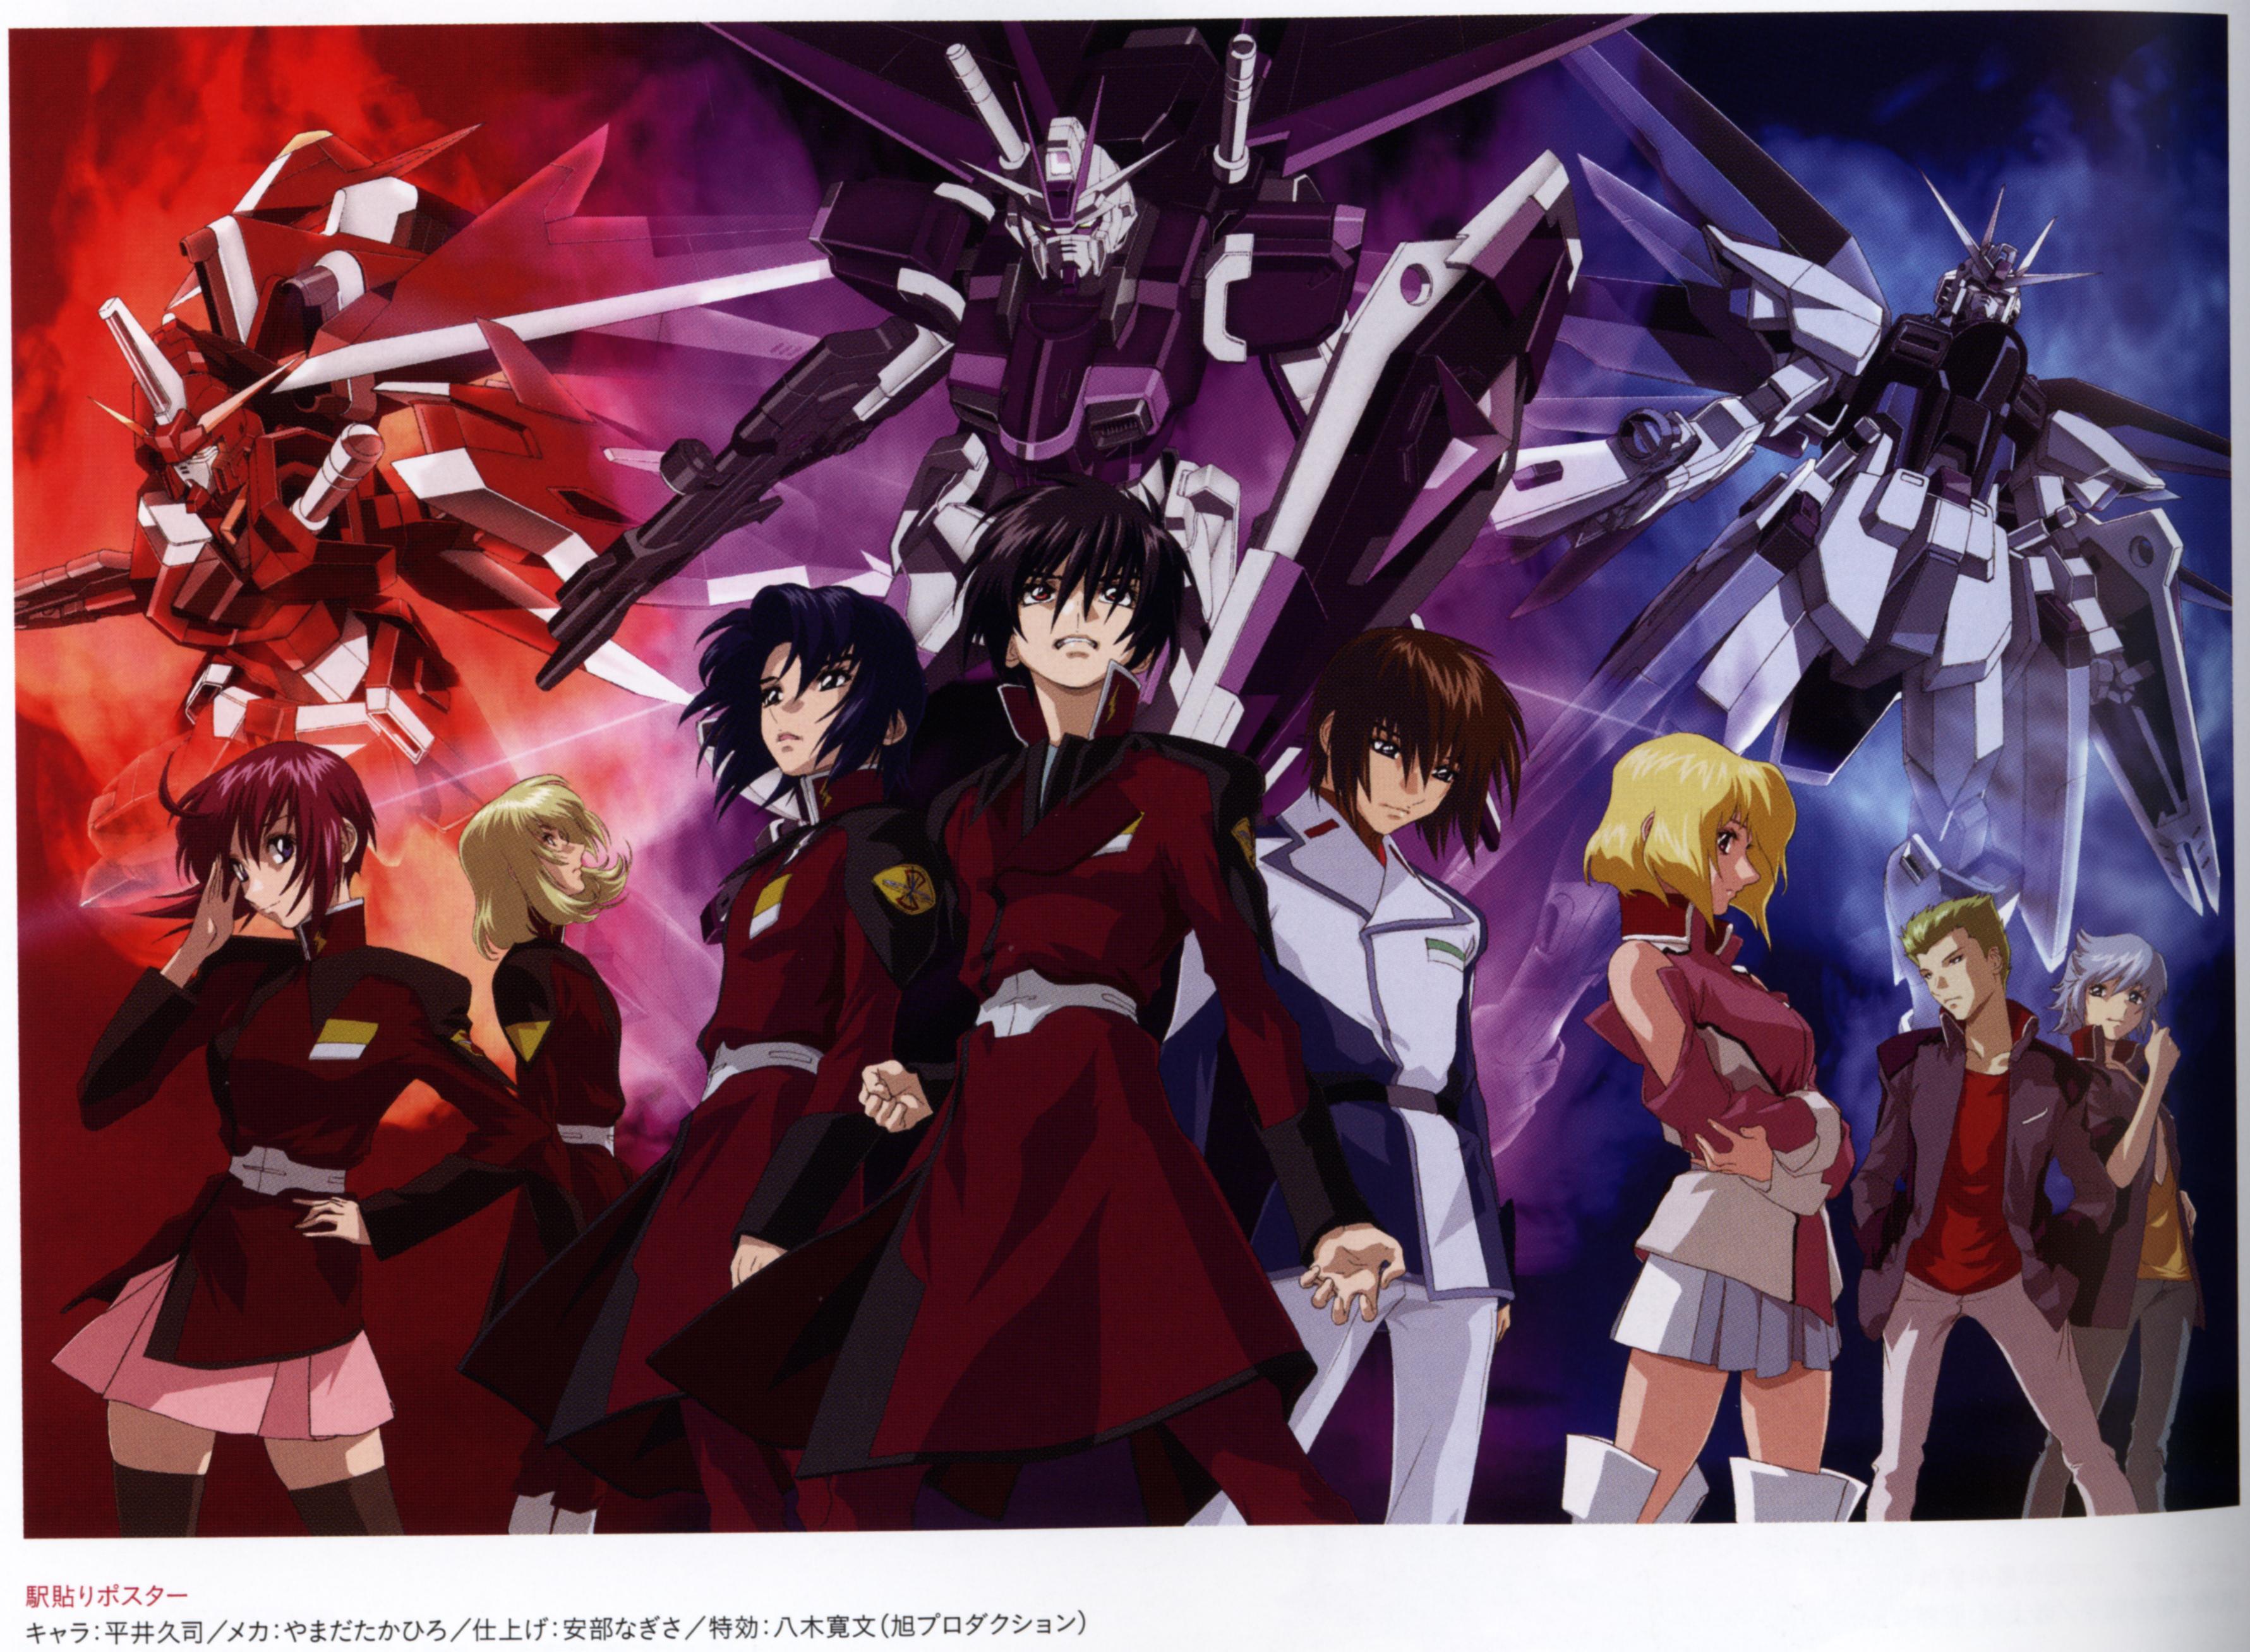 Mobile Suit Gundam Seed Destiny Wallpapers - Top Free Mobile Suit ...